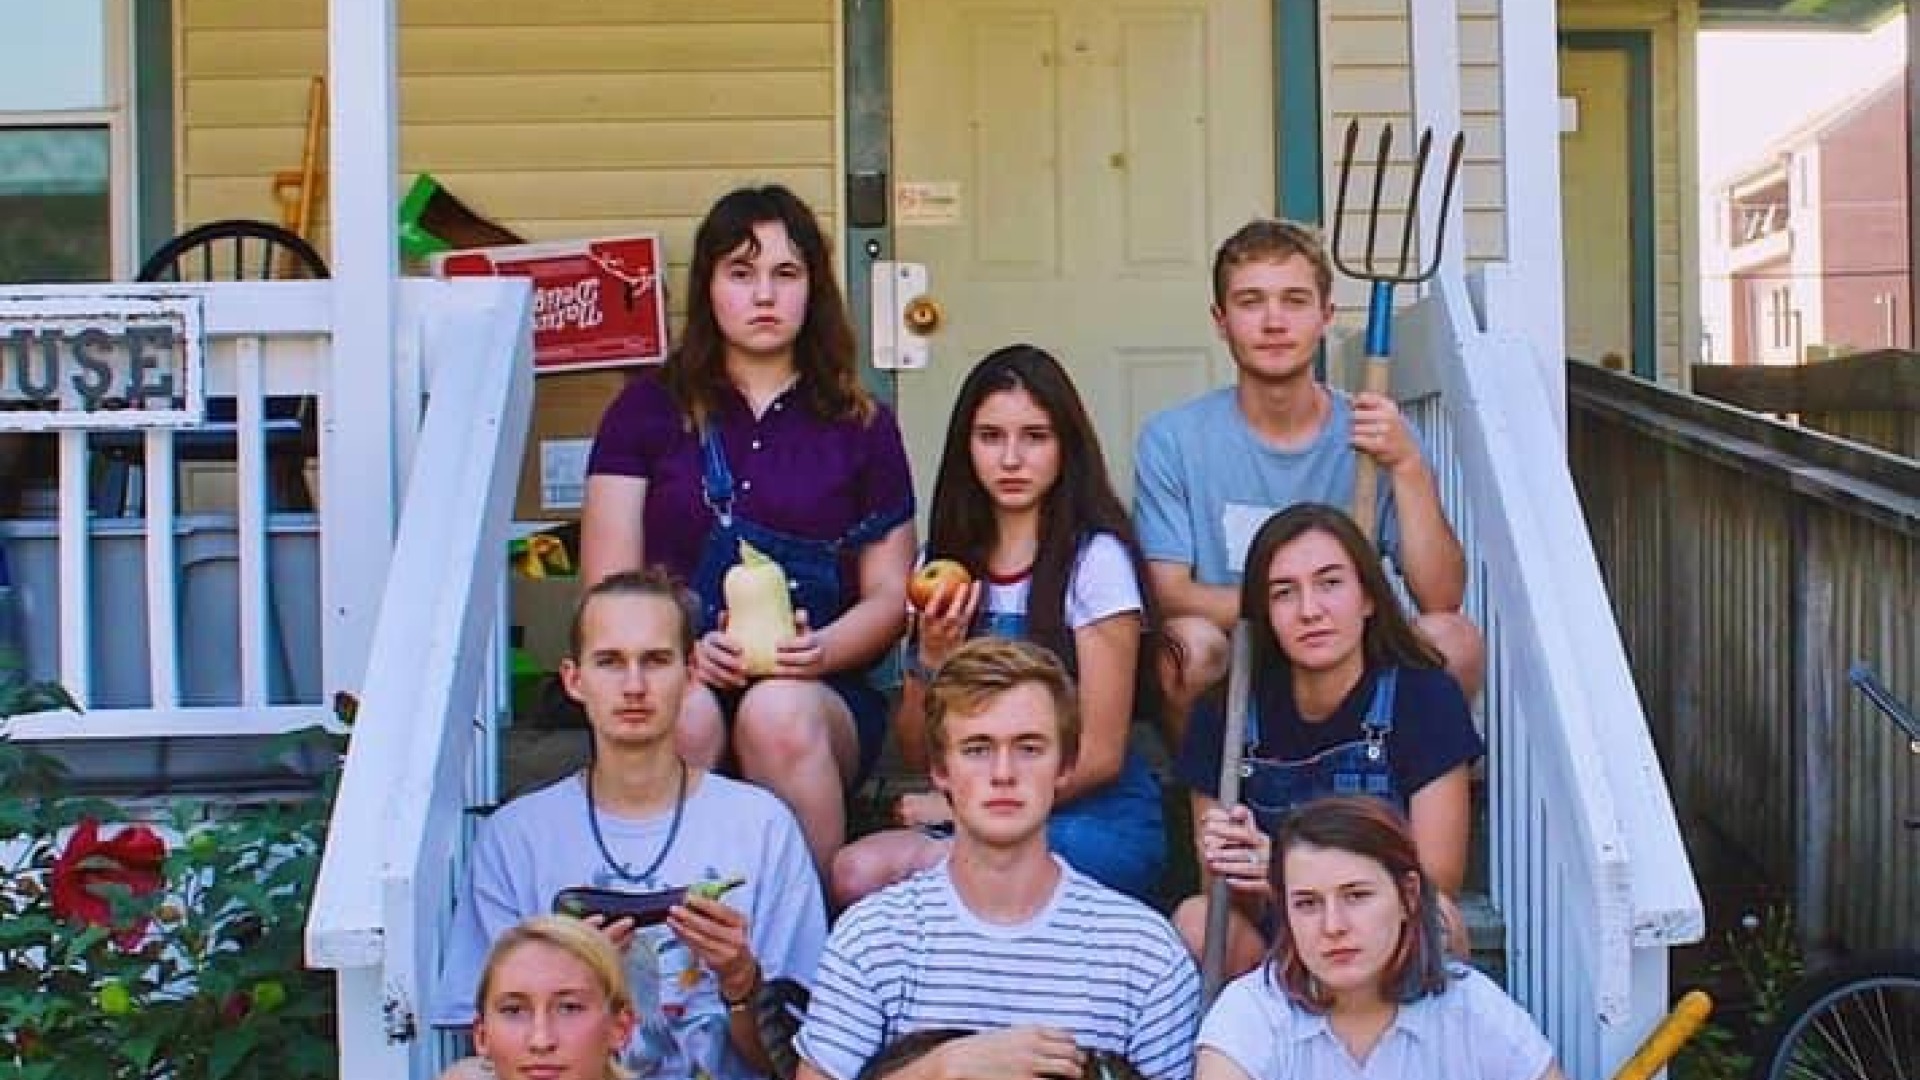 students sitting on porch steps holding farm instruments and produce